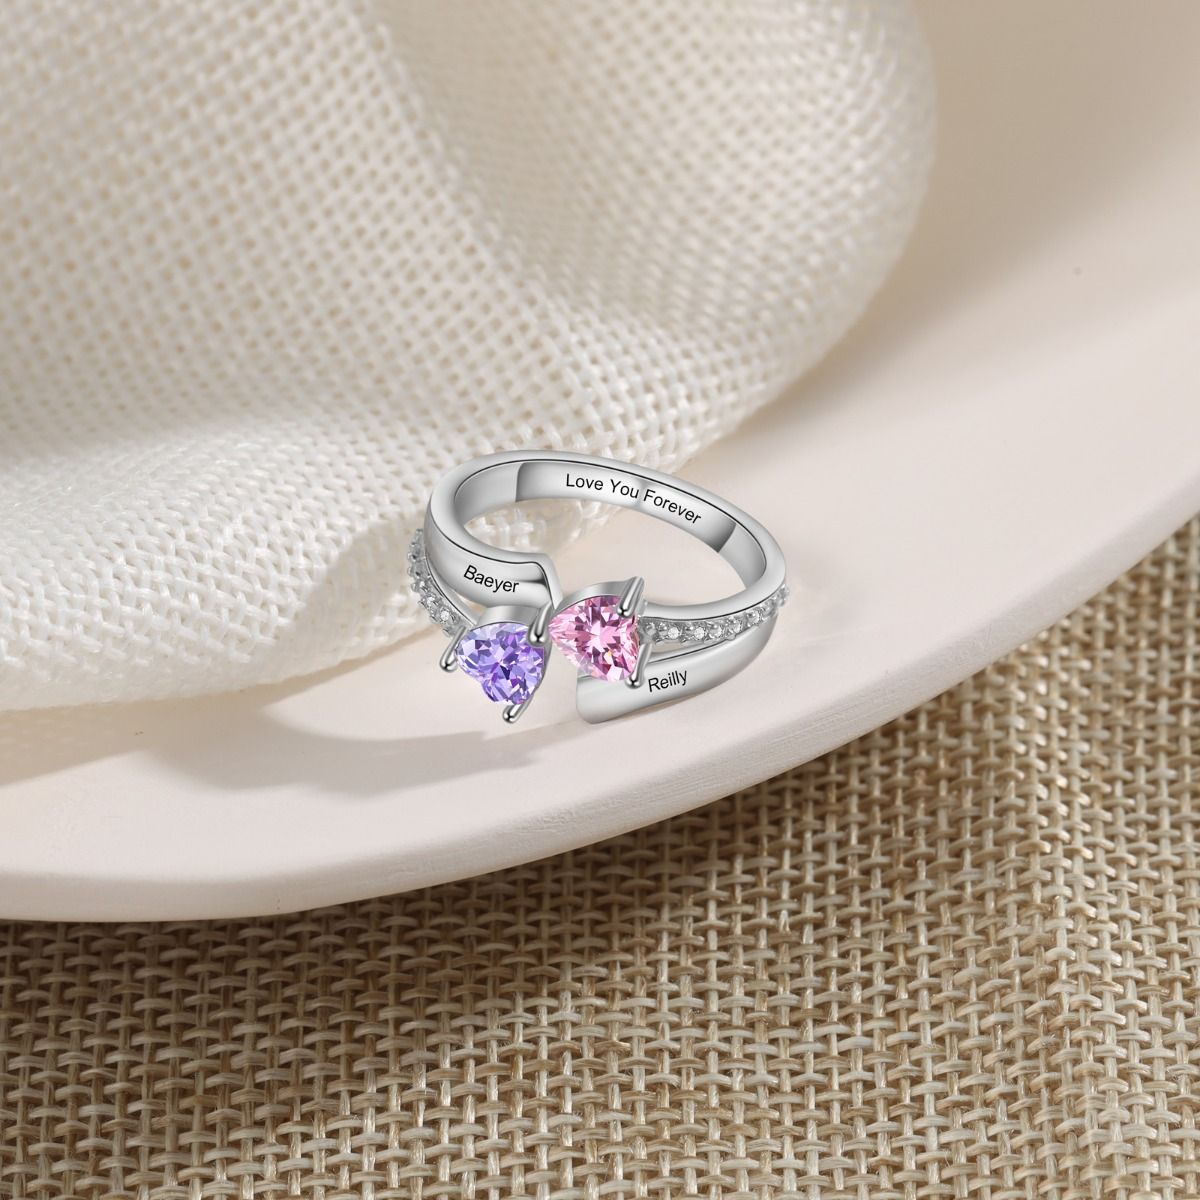 Personalised Up To 4 Birthstones Ring | Bespoke Ring With Engraved Names